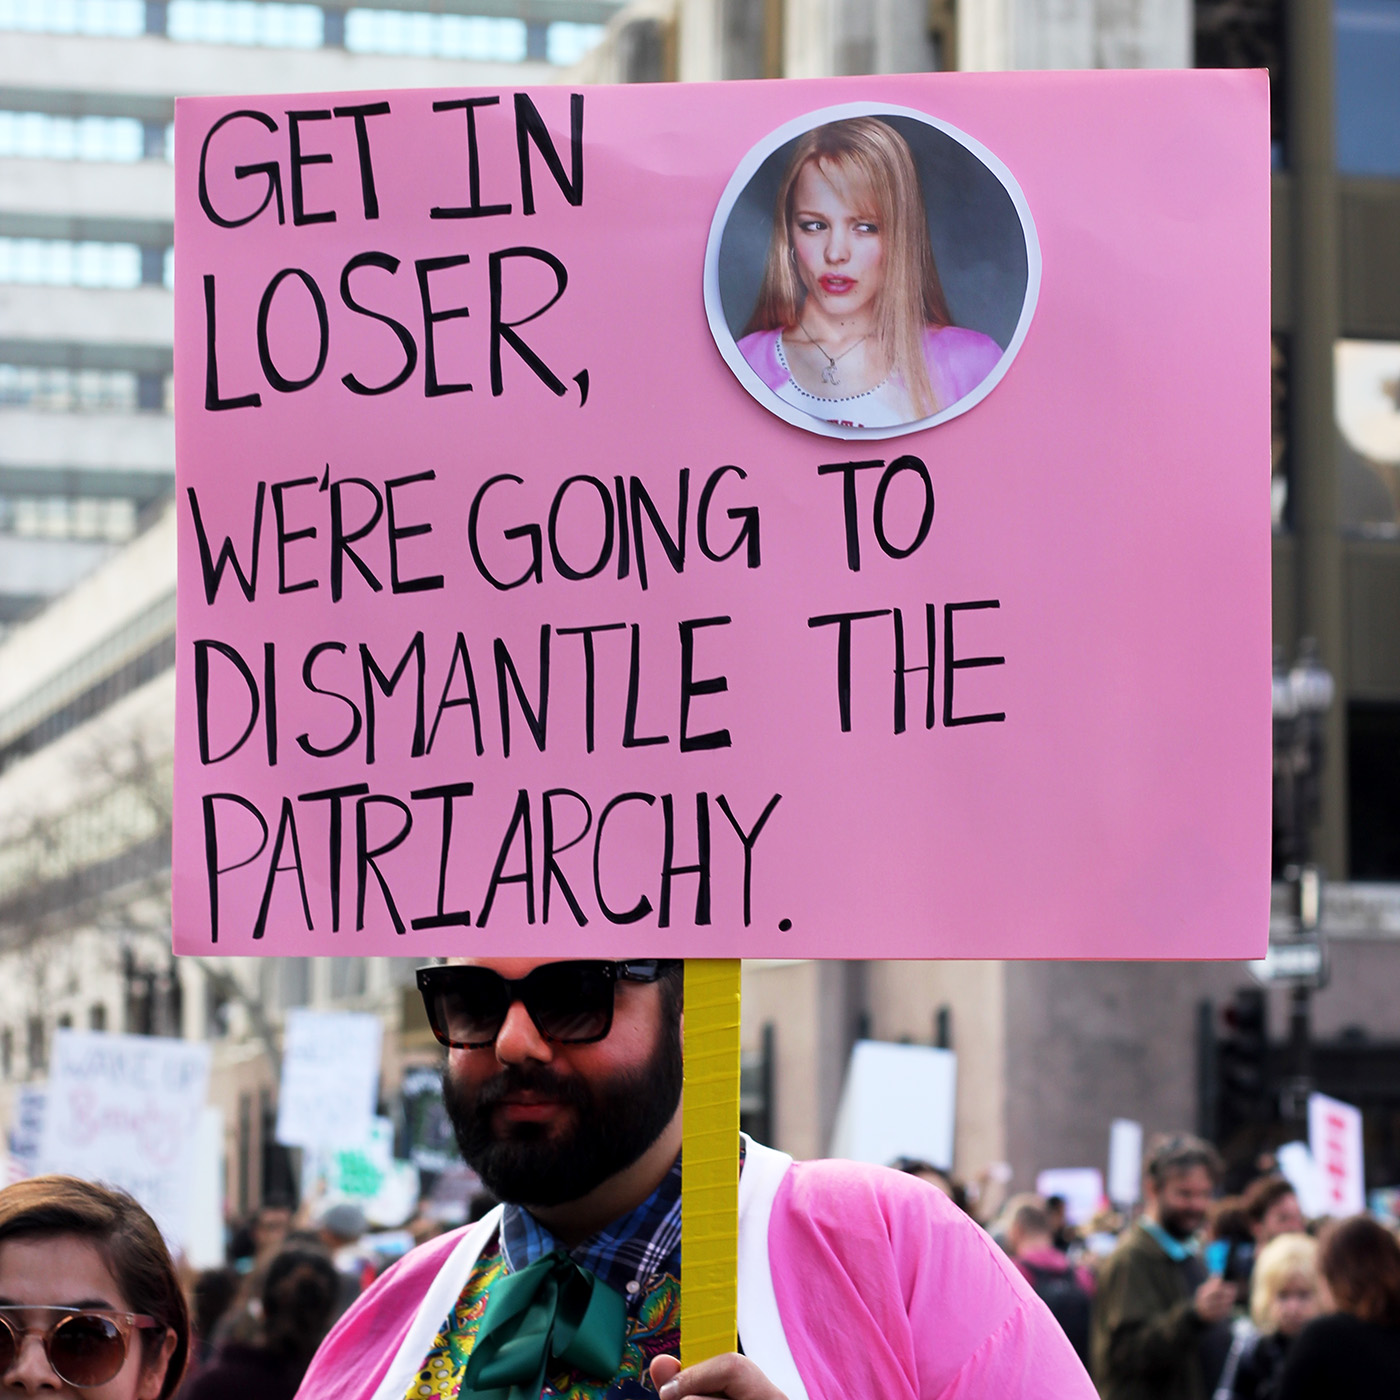 Dismantle the Patriarchy